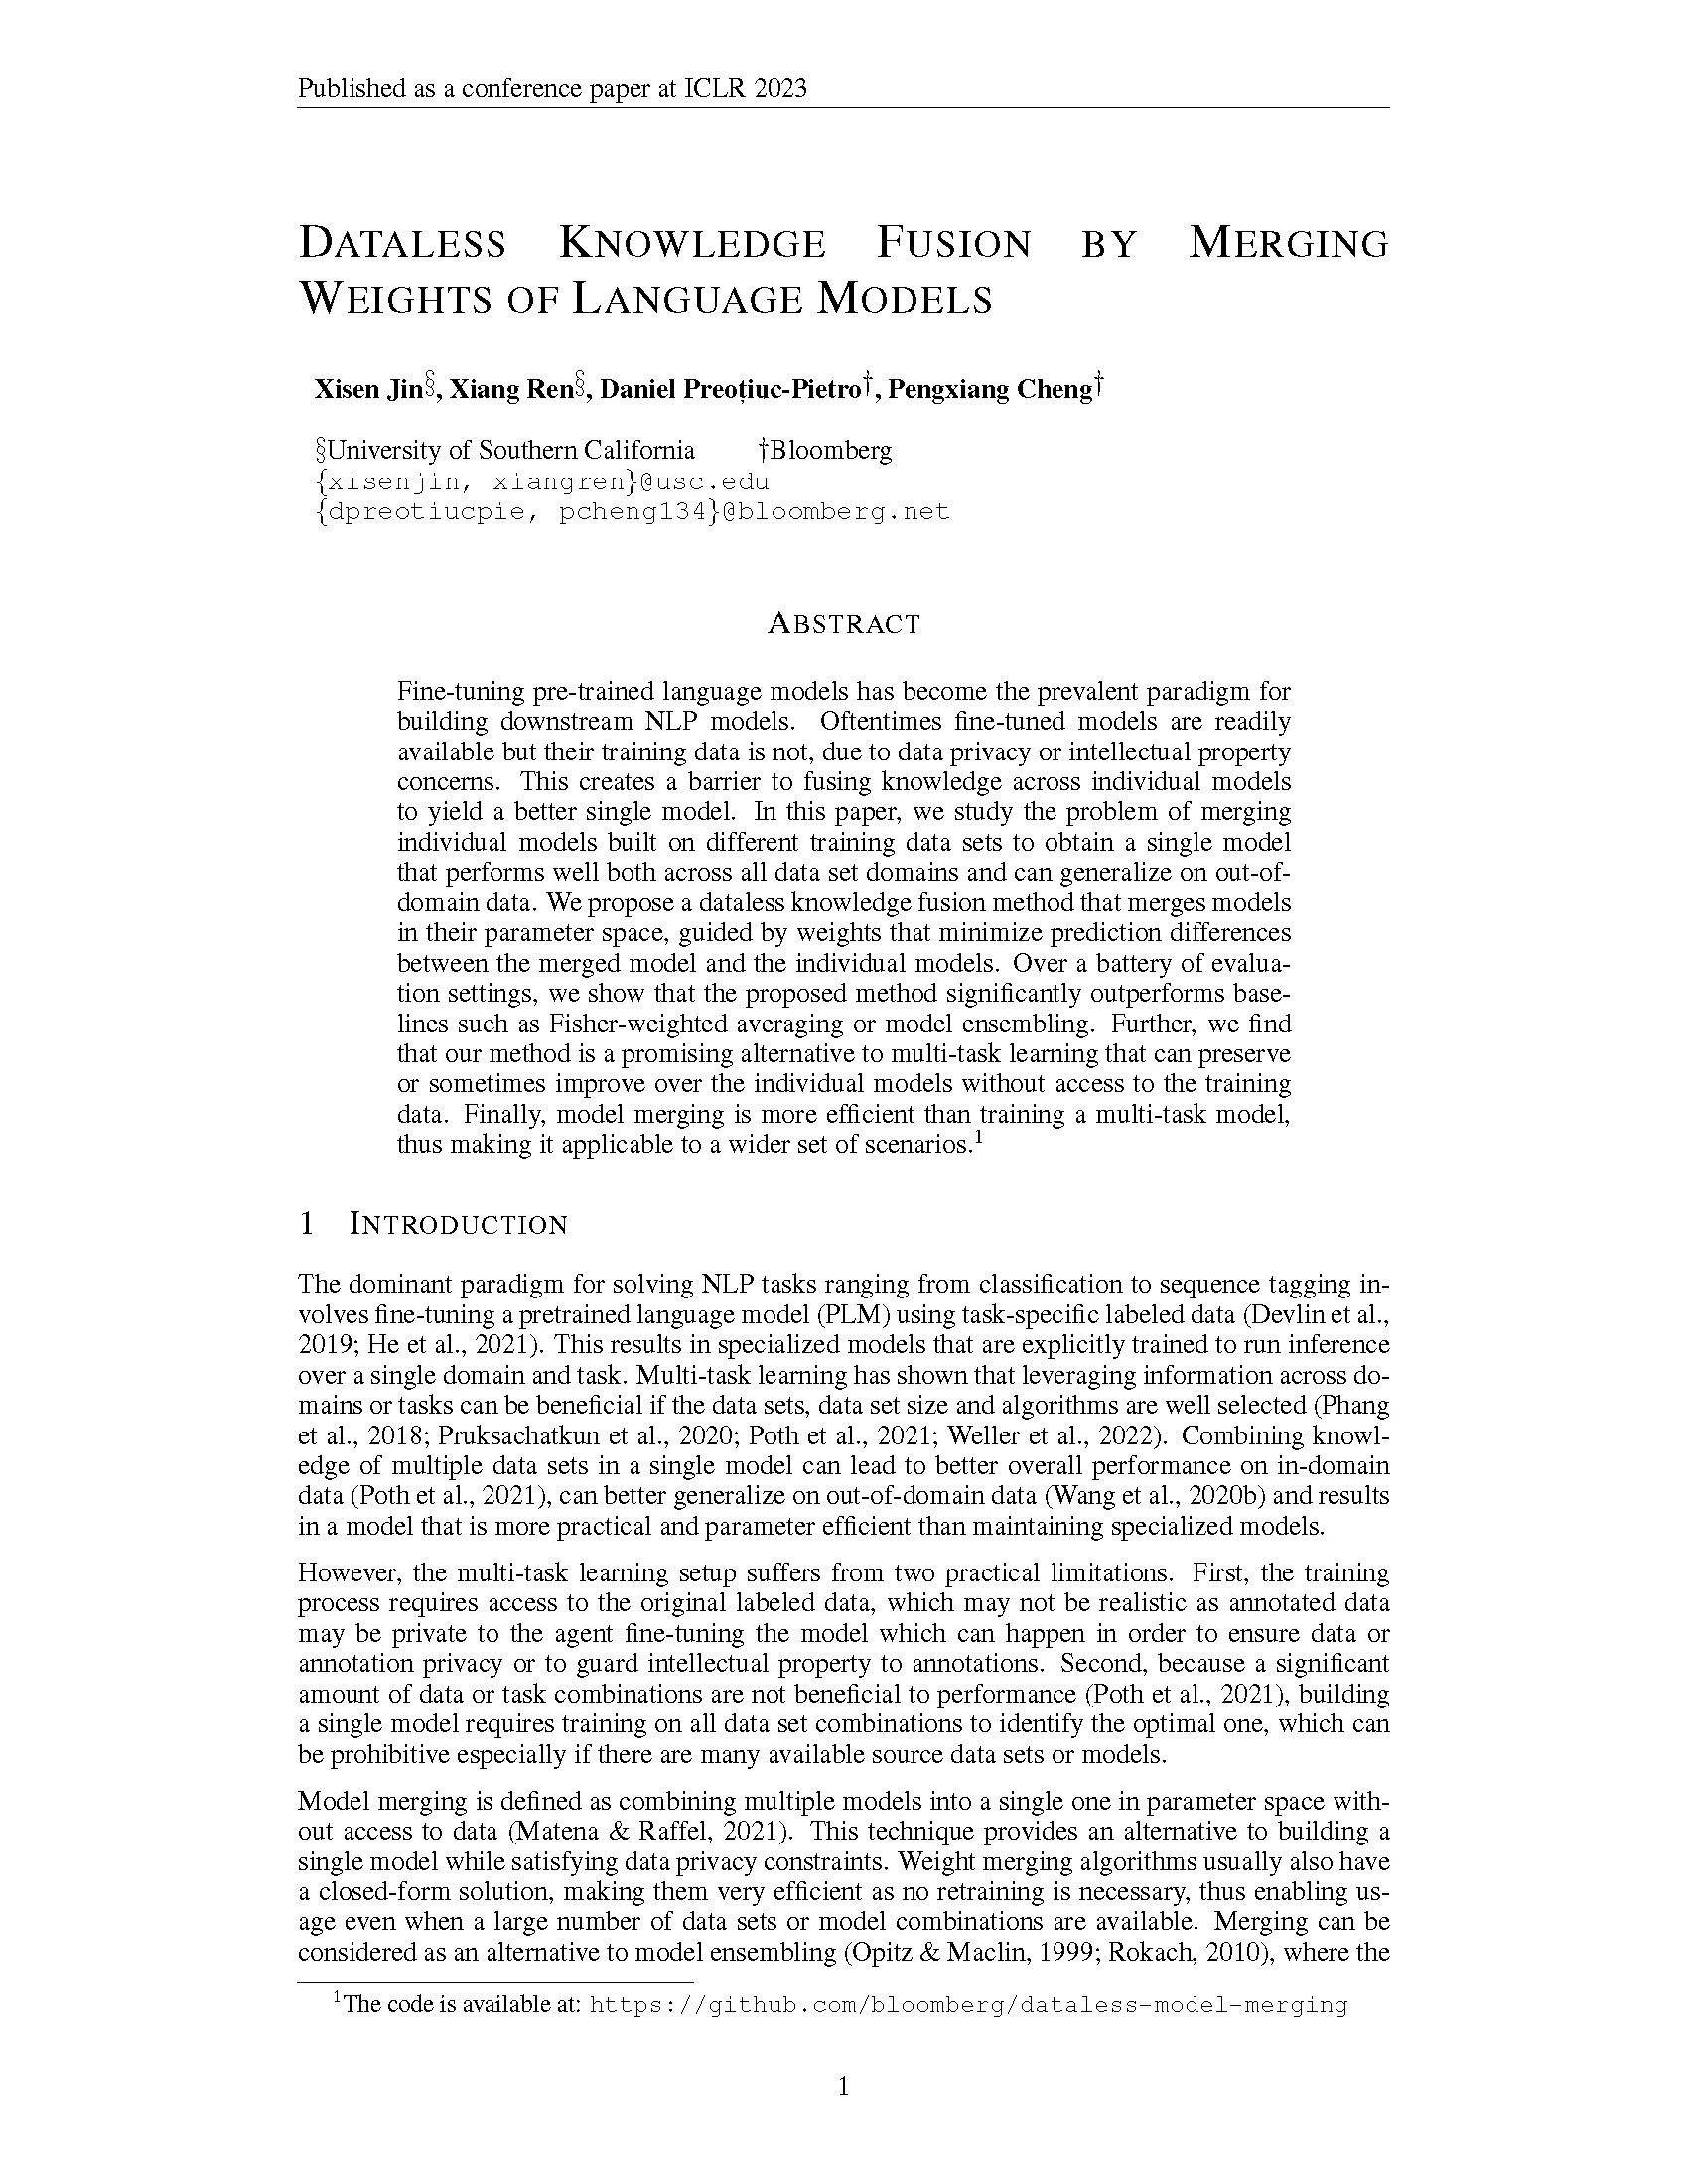 Front page of ICLR 2023 paper "Dataless Knowledge Fusion by Merging Weights of Language Models"